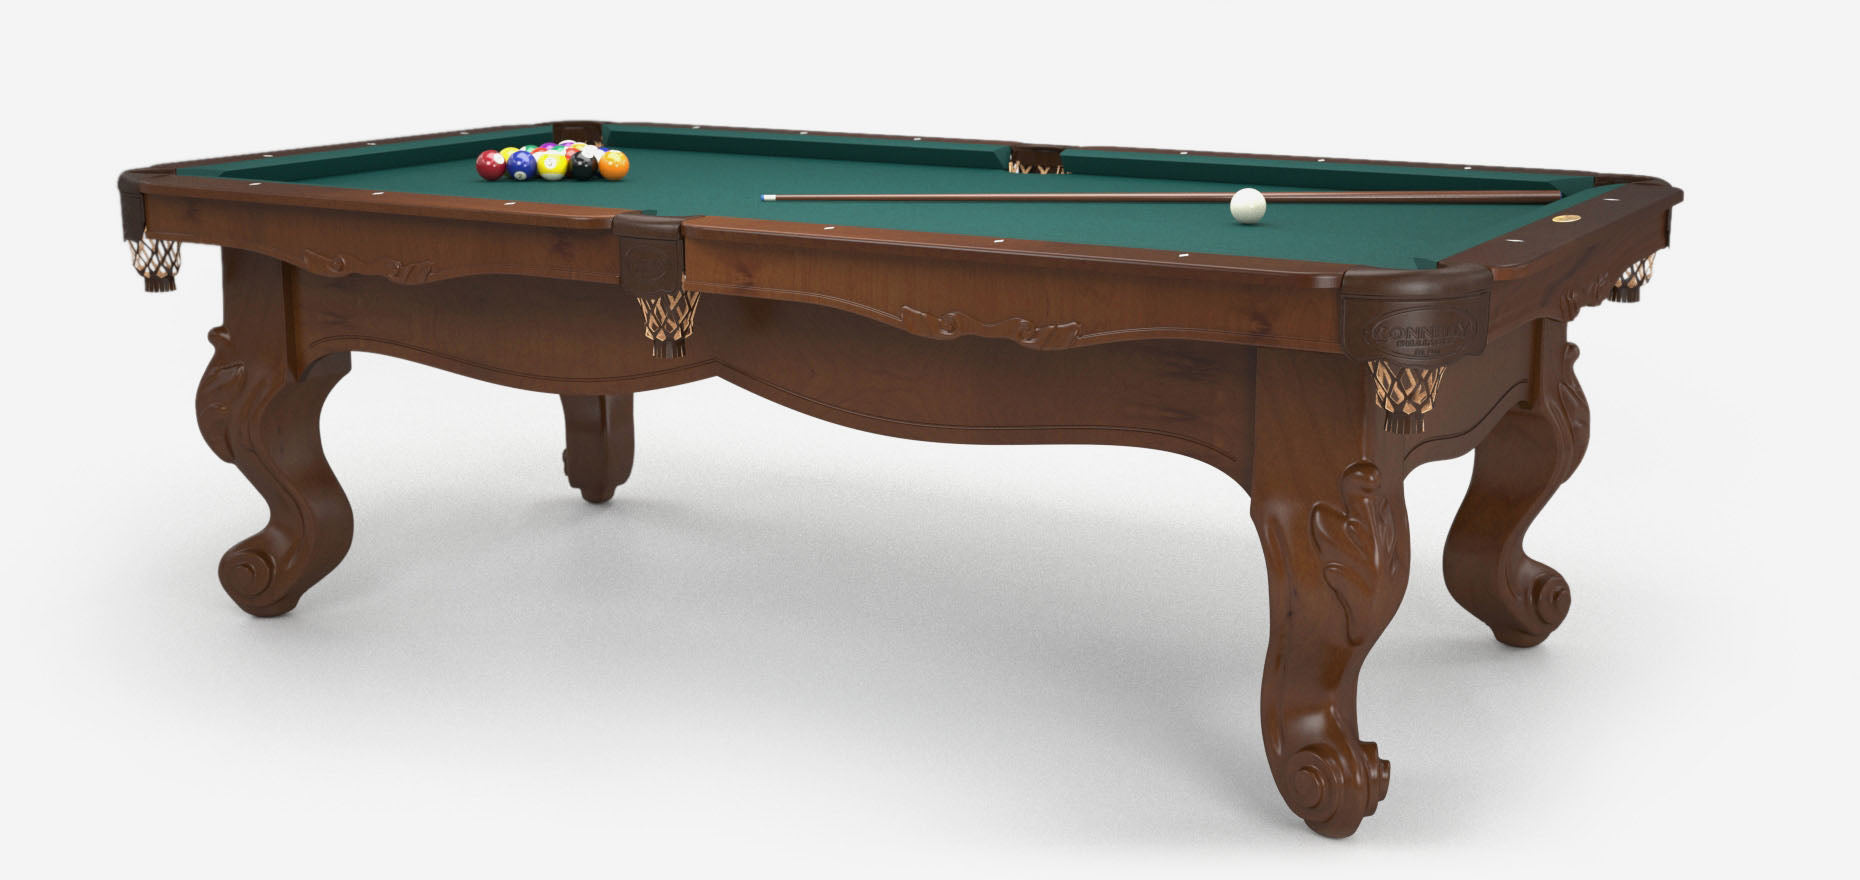 Connelly Billiards Scottsdale Slate Pool Table